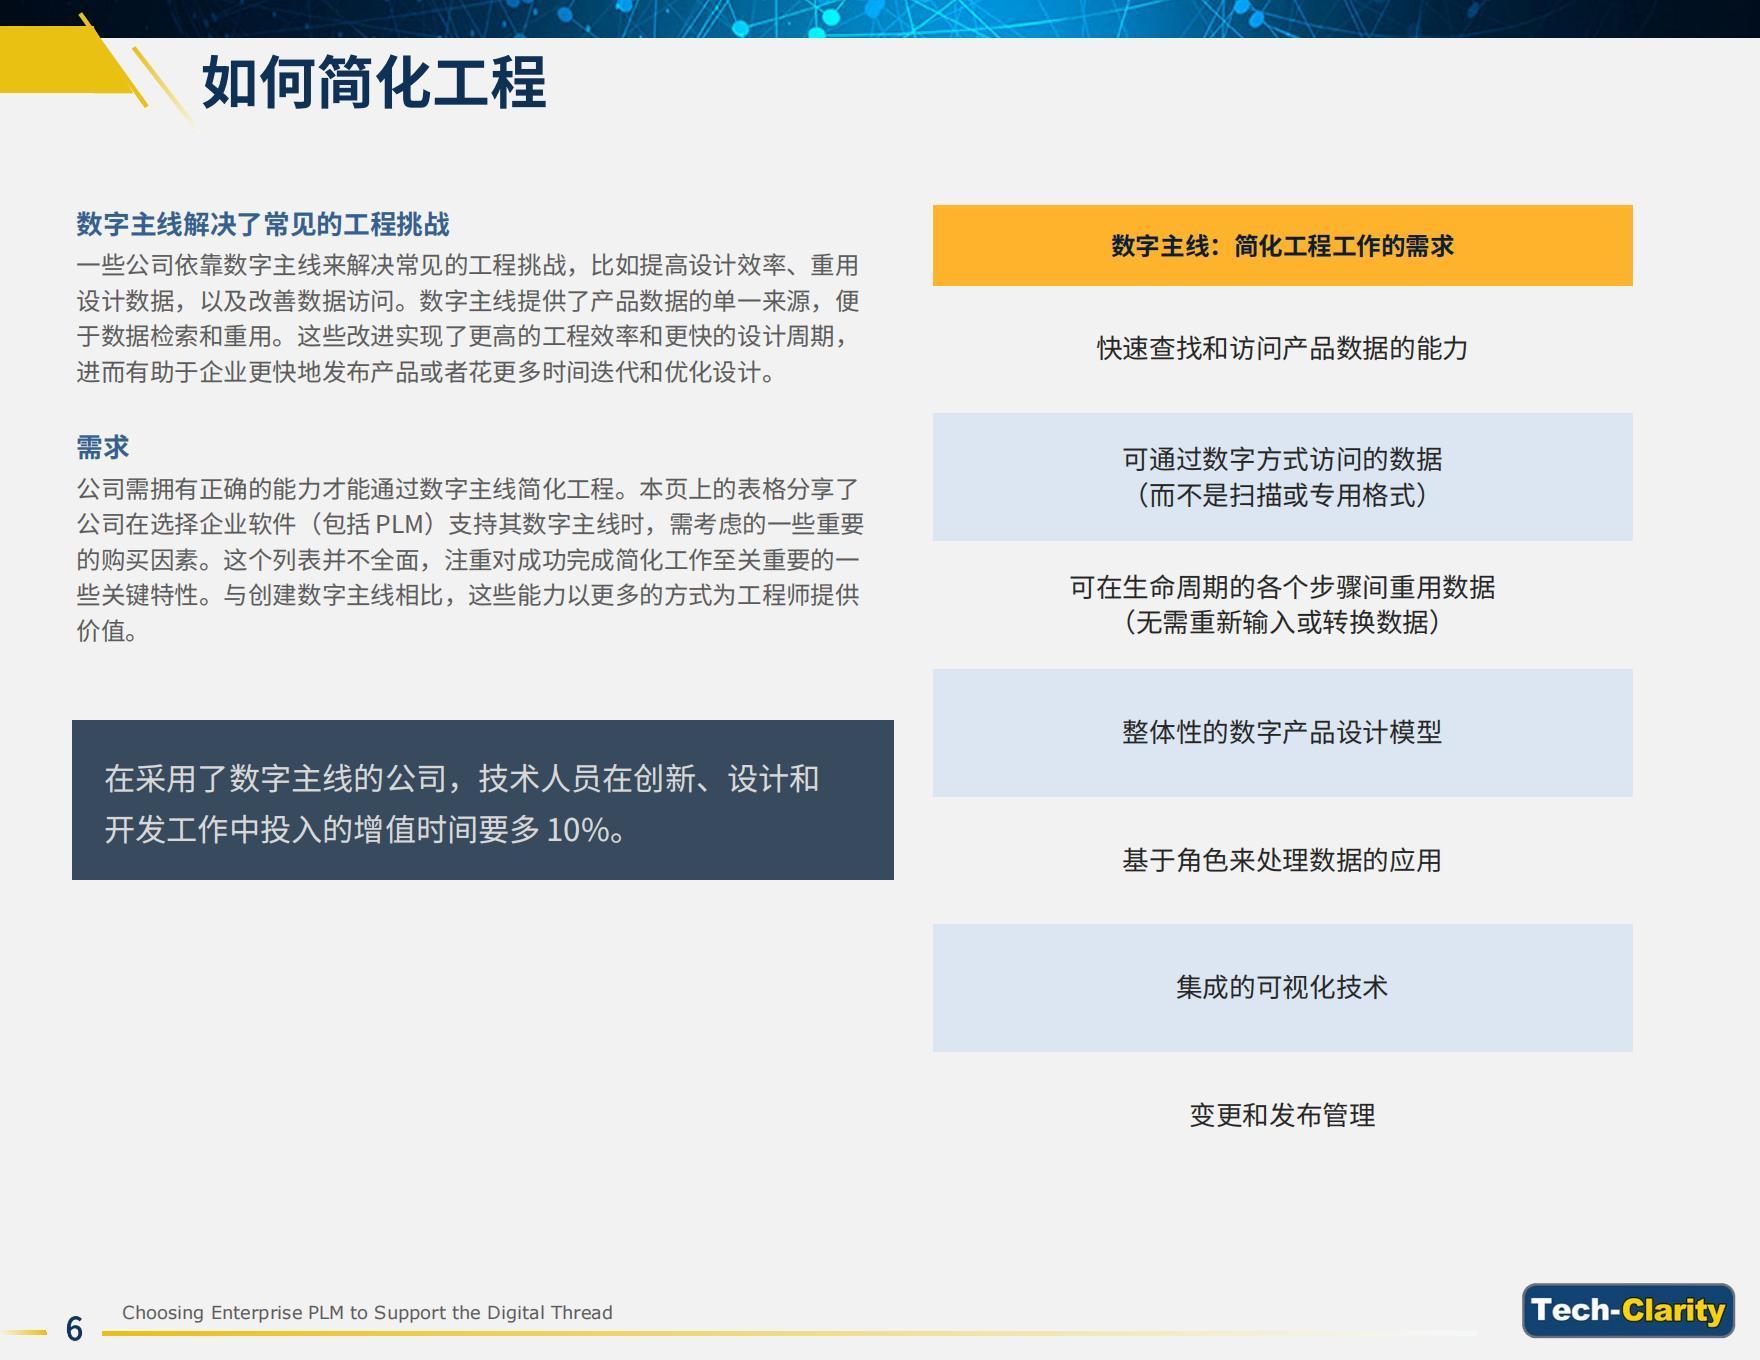 Tech-Clarity DIgital Thread PLM Buyer's Guide (Simplified Chinese)_05